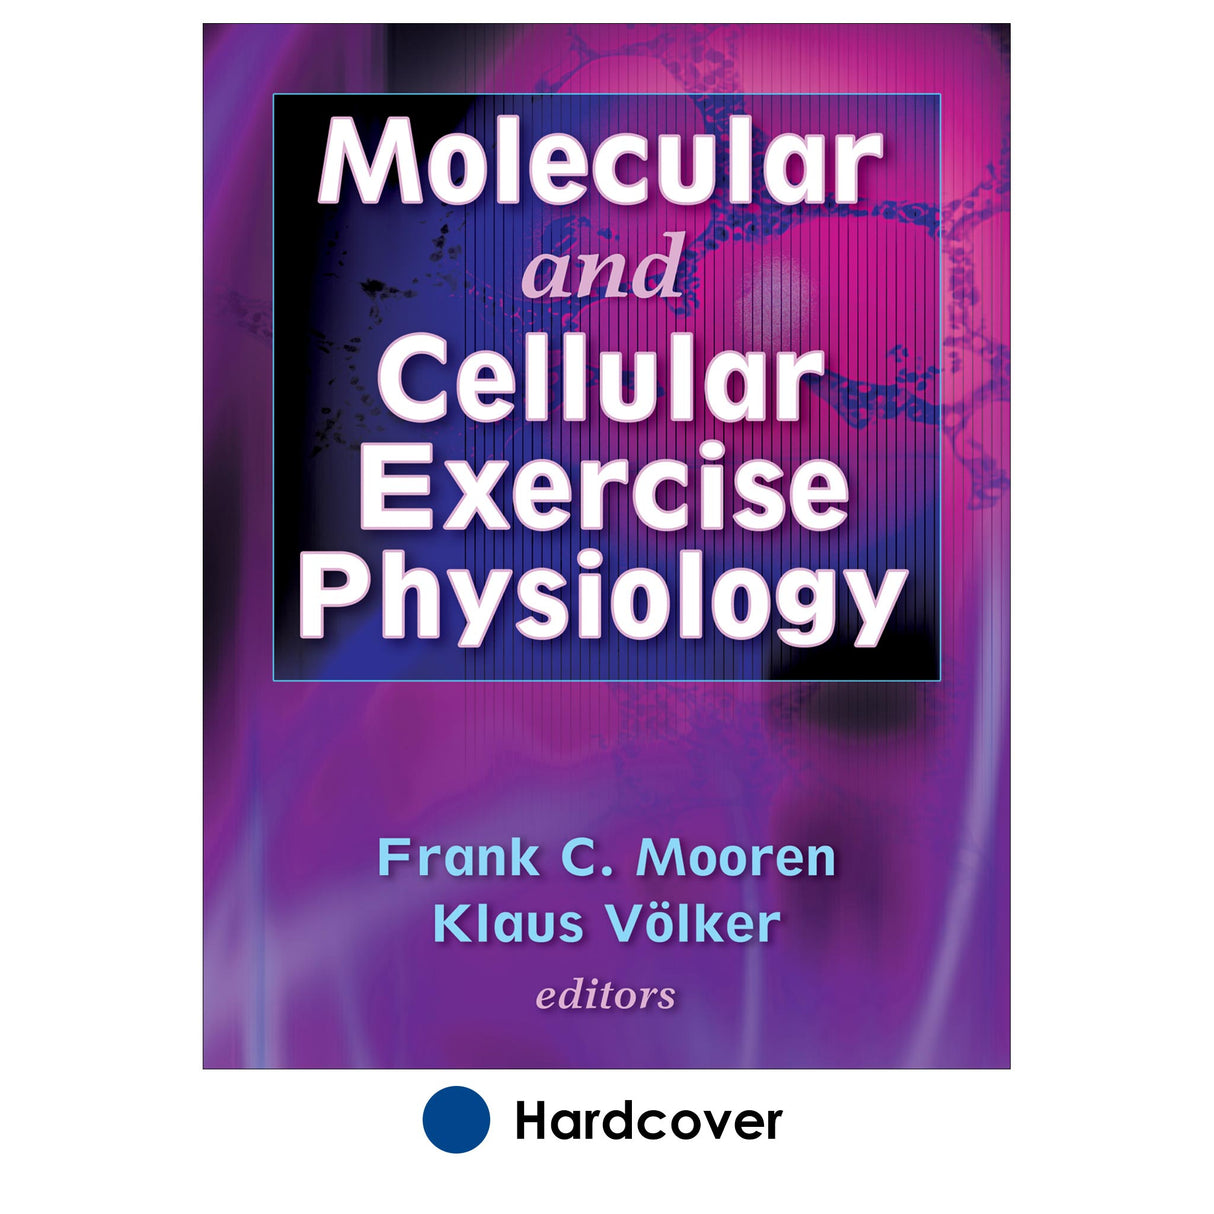 Molecular and Cellular Exercise Physiology